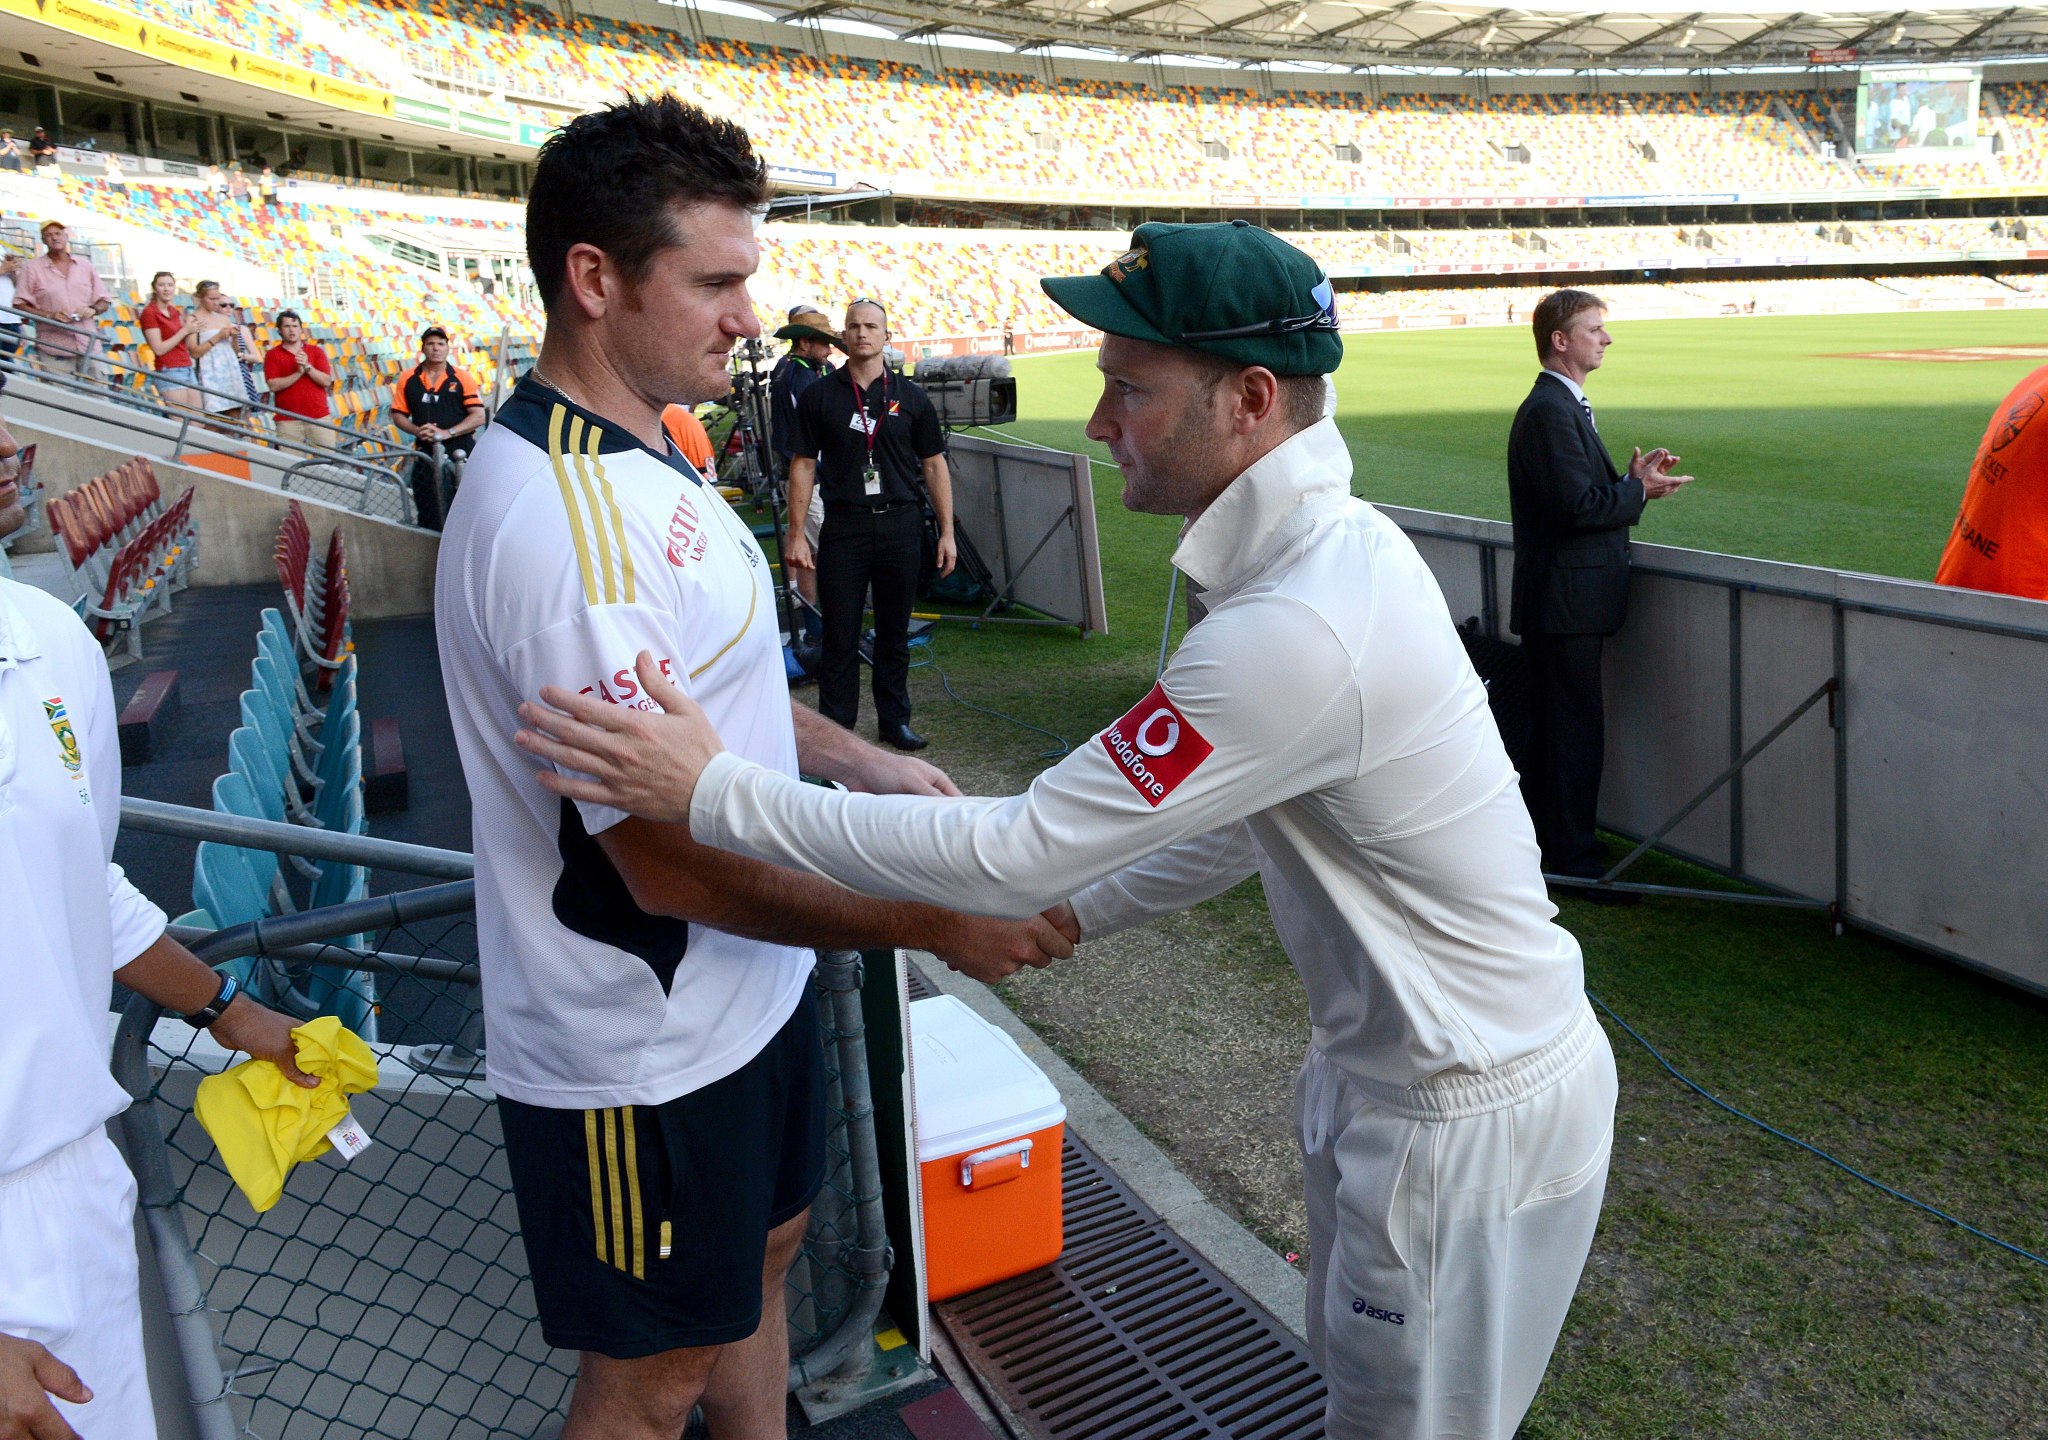 South Africa captain Graeme Smith (left) and Australia captain Michael Clarke shake hands at the end of the first test at the Gabba in Brisbane on Tuesday. Photo: EPA